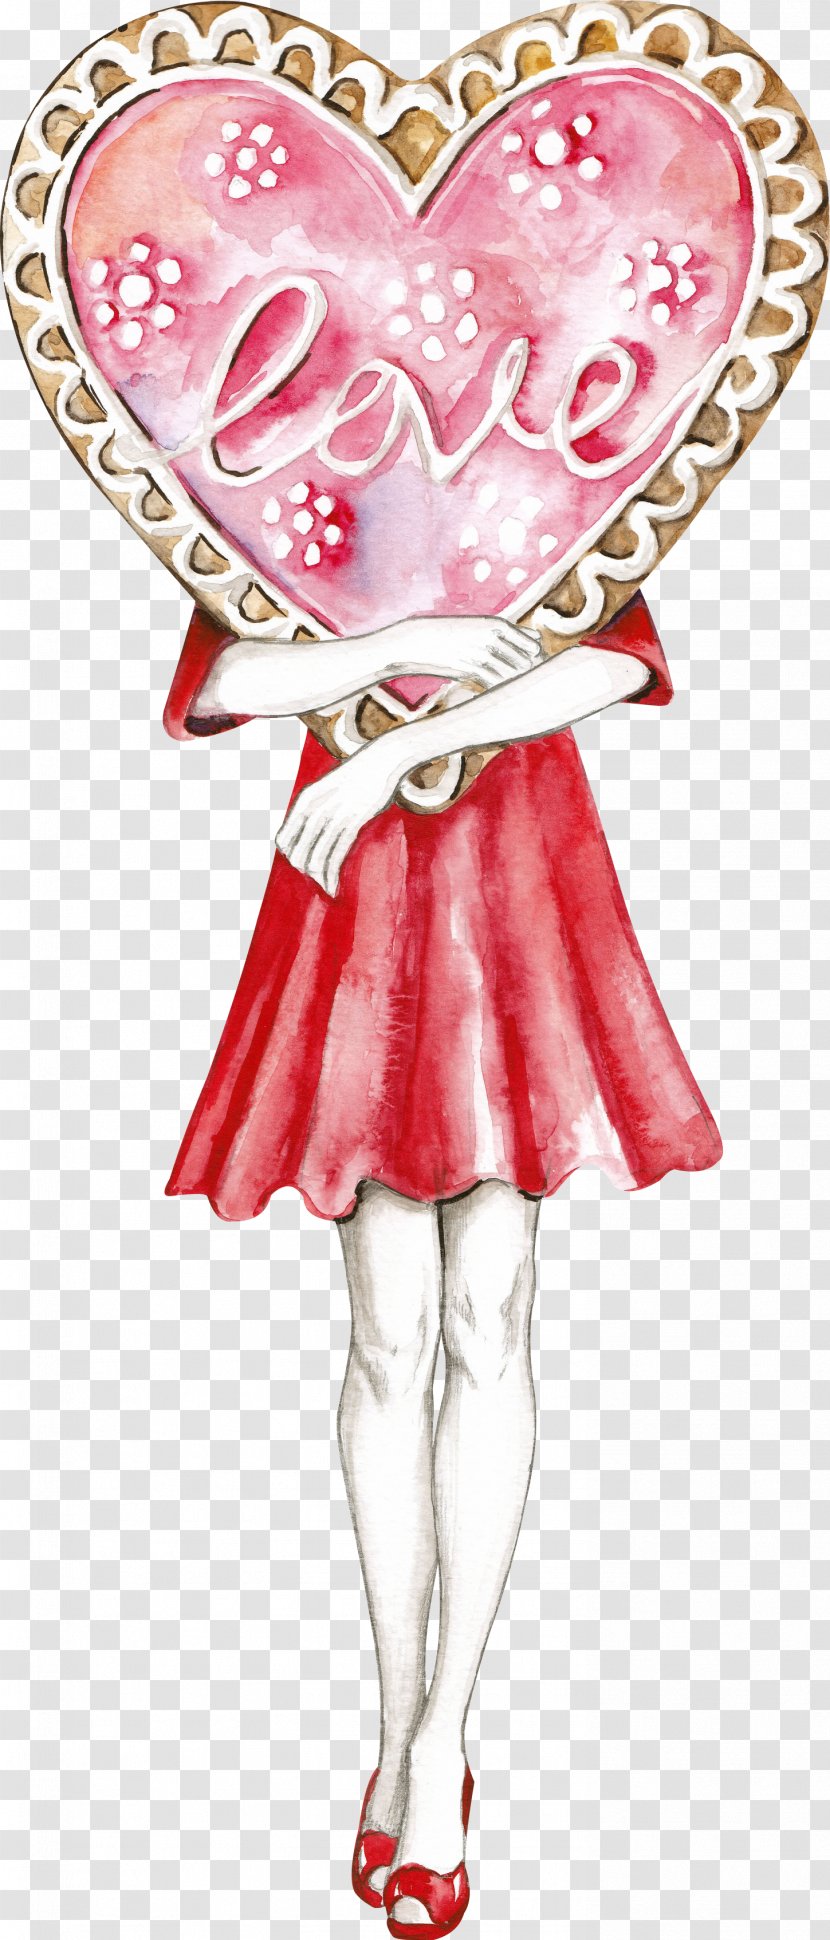 Valentines Day Heart - Watercolor Painting - Pink Lady Figurine Transparent PNG